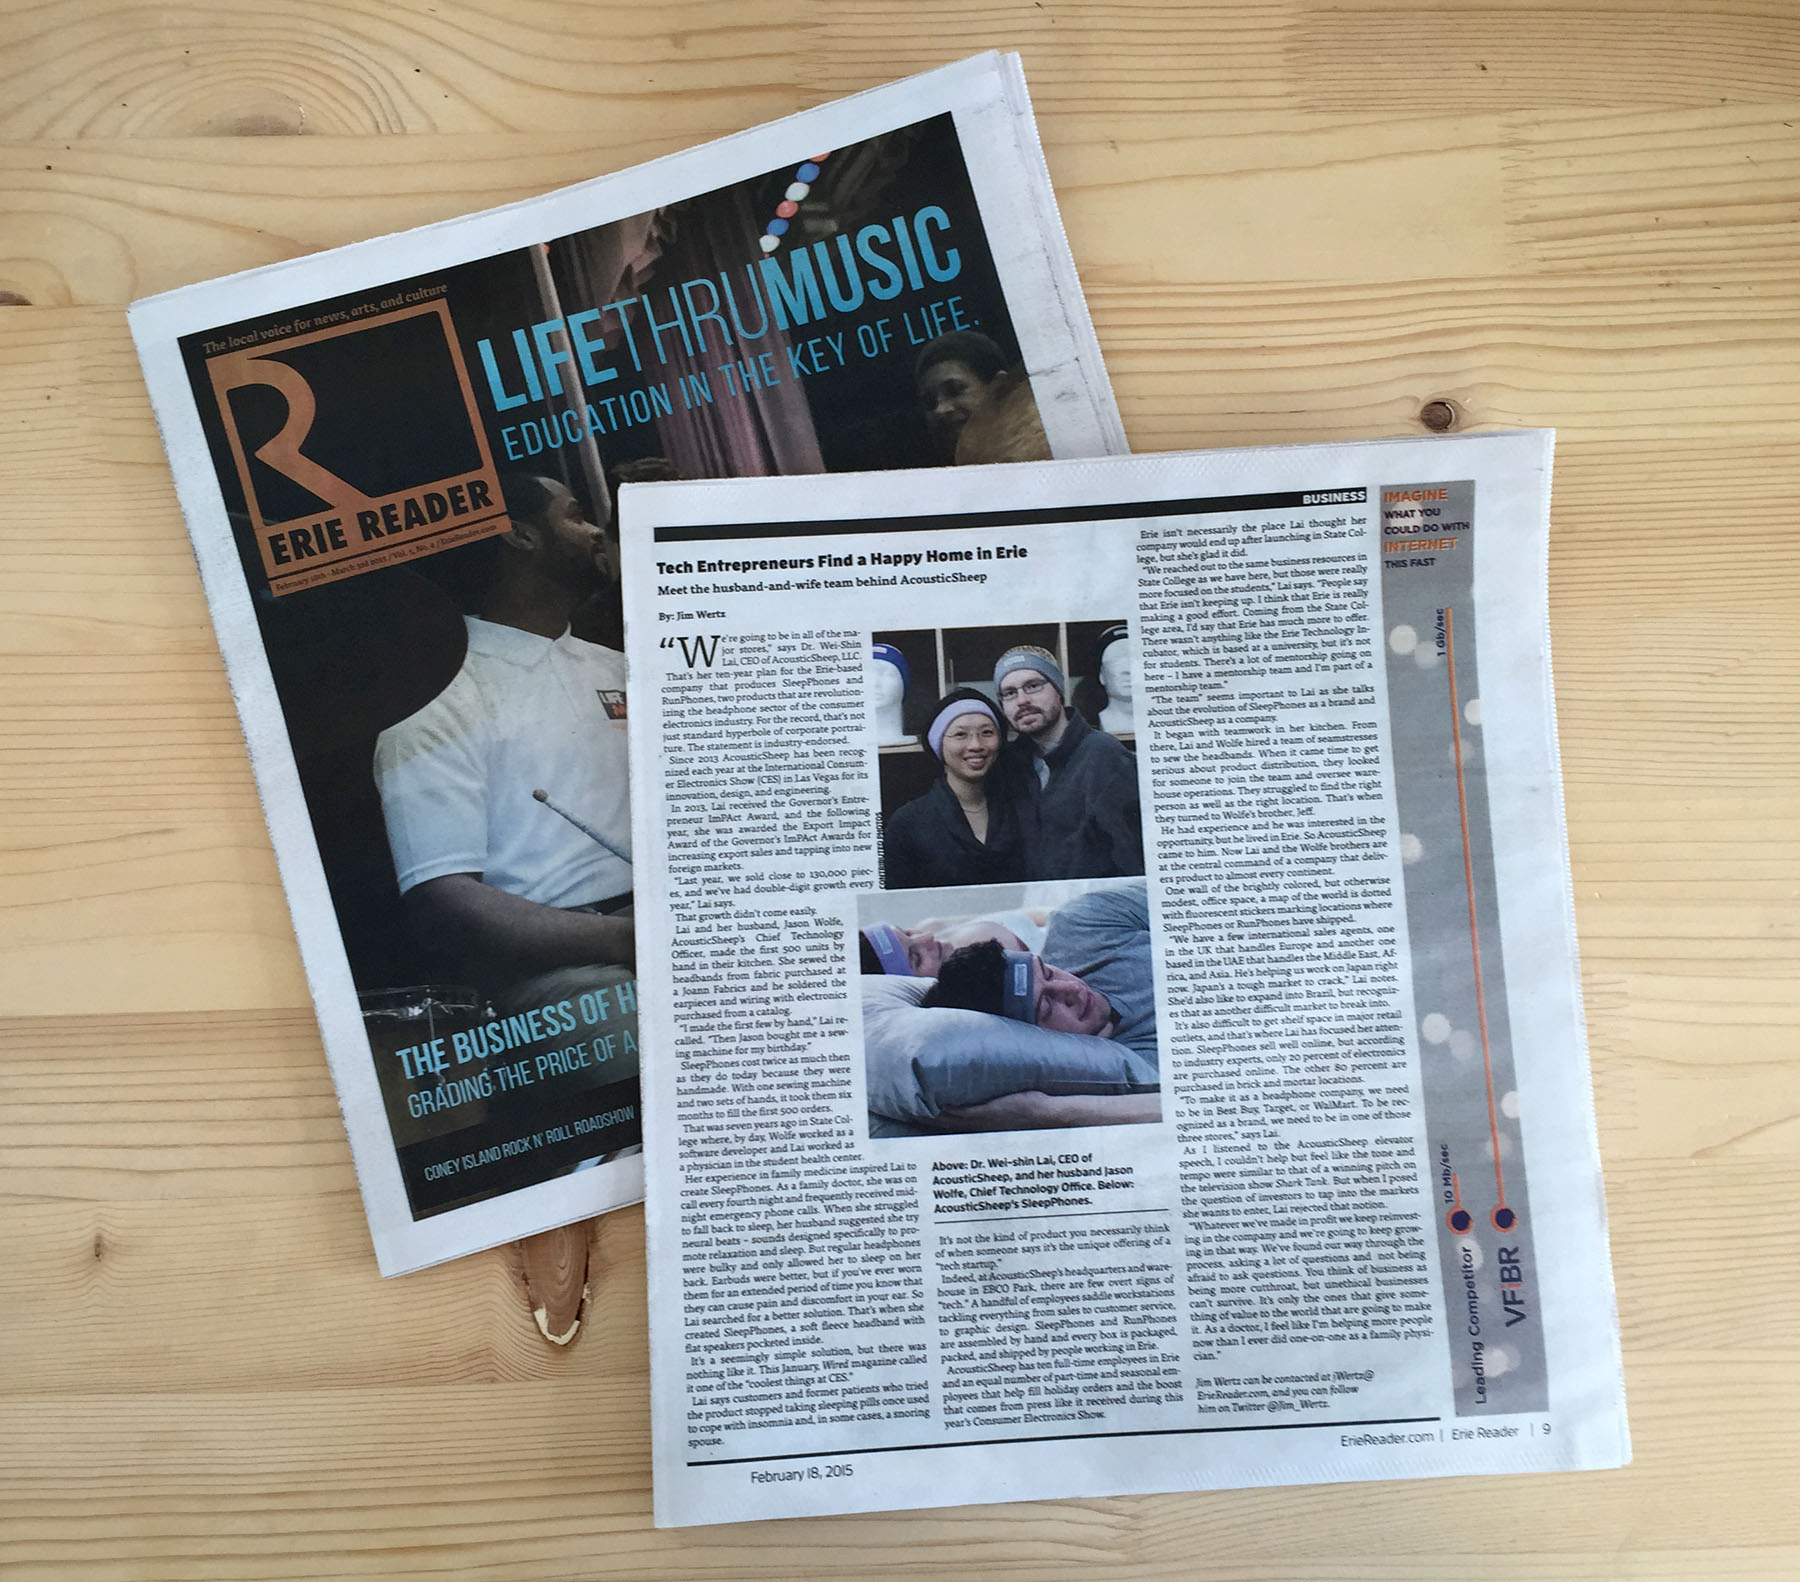 AcousticSheep, Jason Wolfe and Wei-Shin feature in article in the Erie Reader